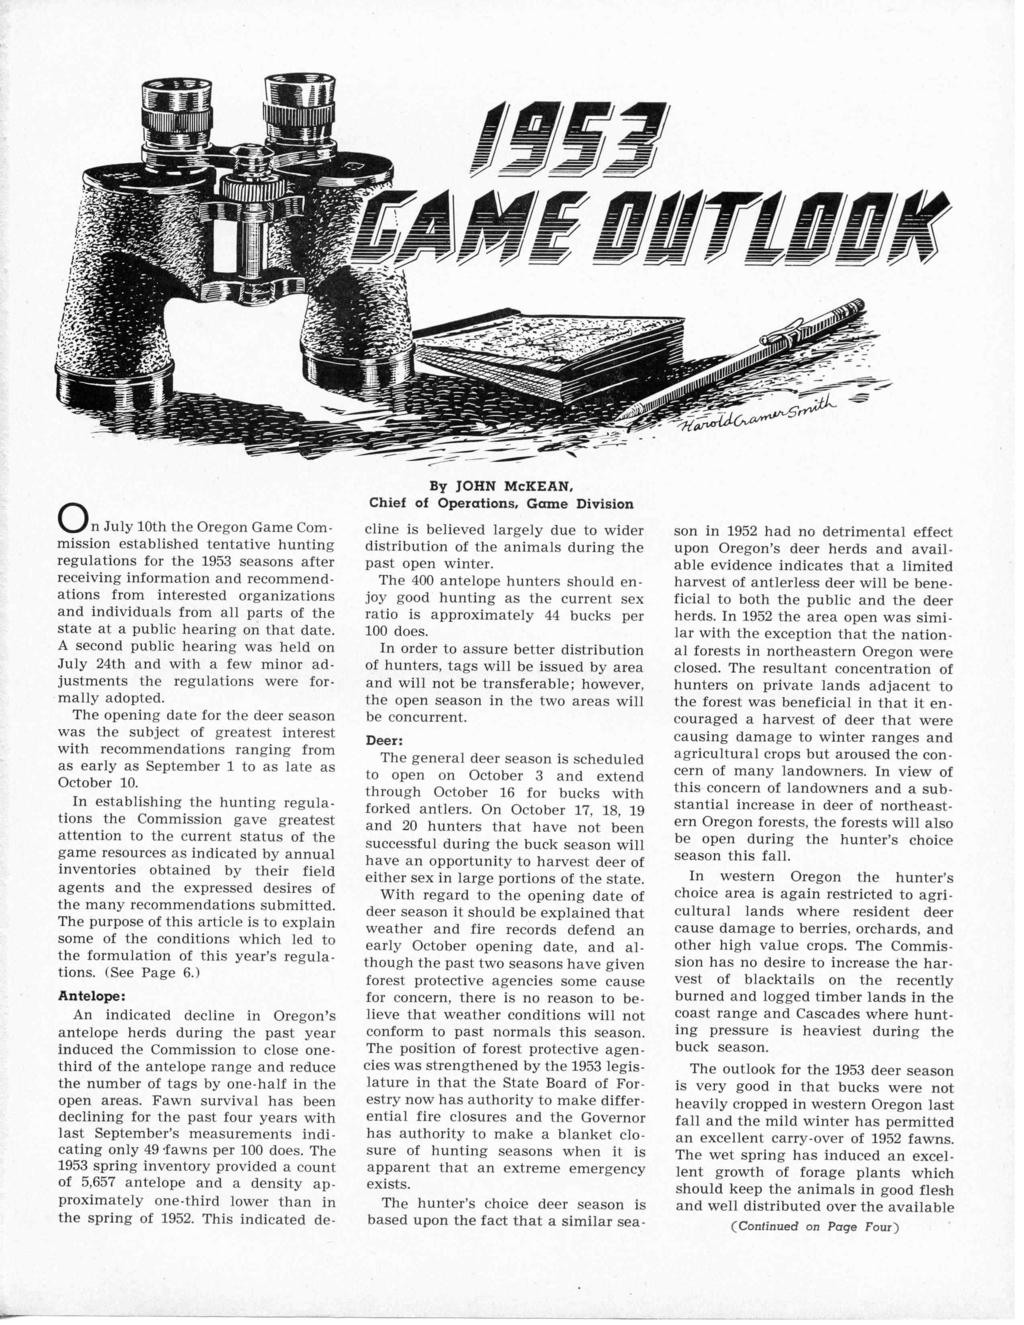 On July 10th the Oregon Game Commission established tentative hunting regulations for the 1953 seasons after receiving information and recommendations from interested organizations and individuals